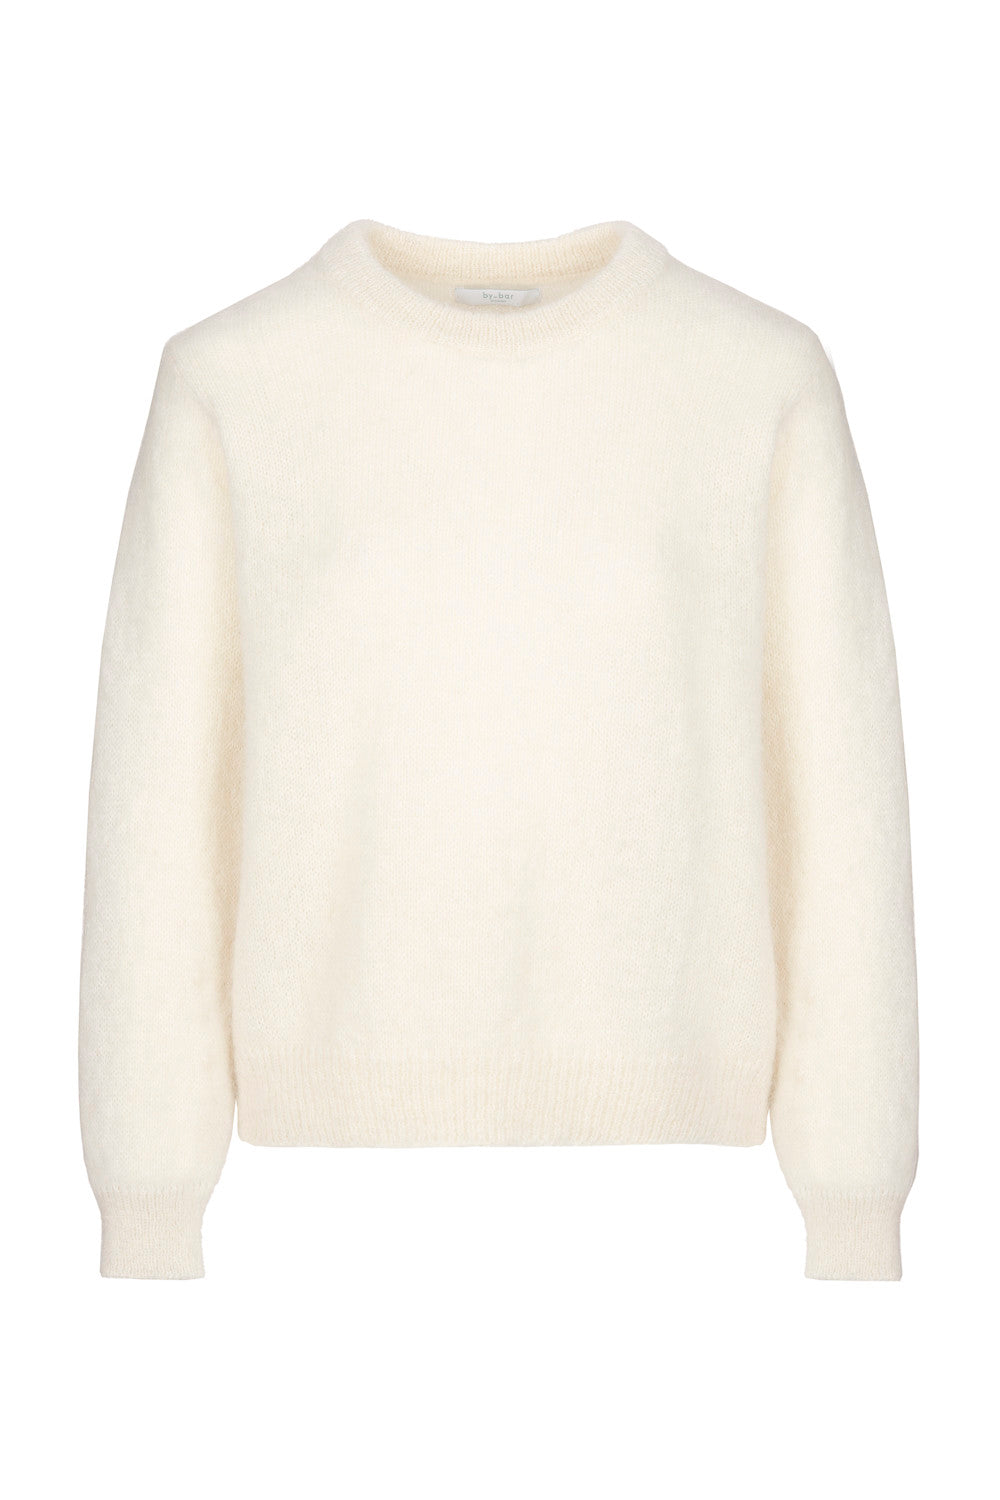 By-Bar - lana organic pullover - off white